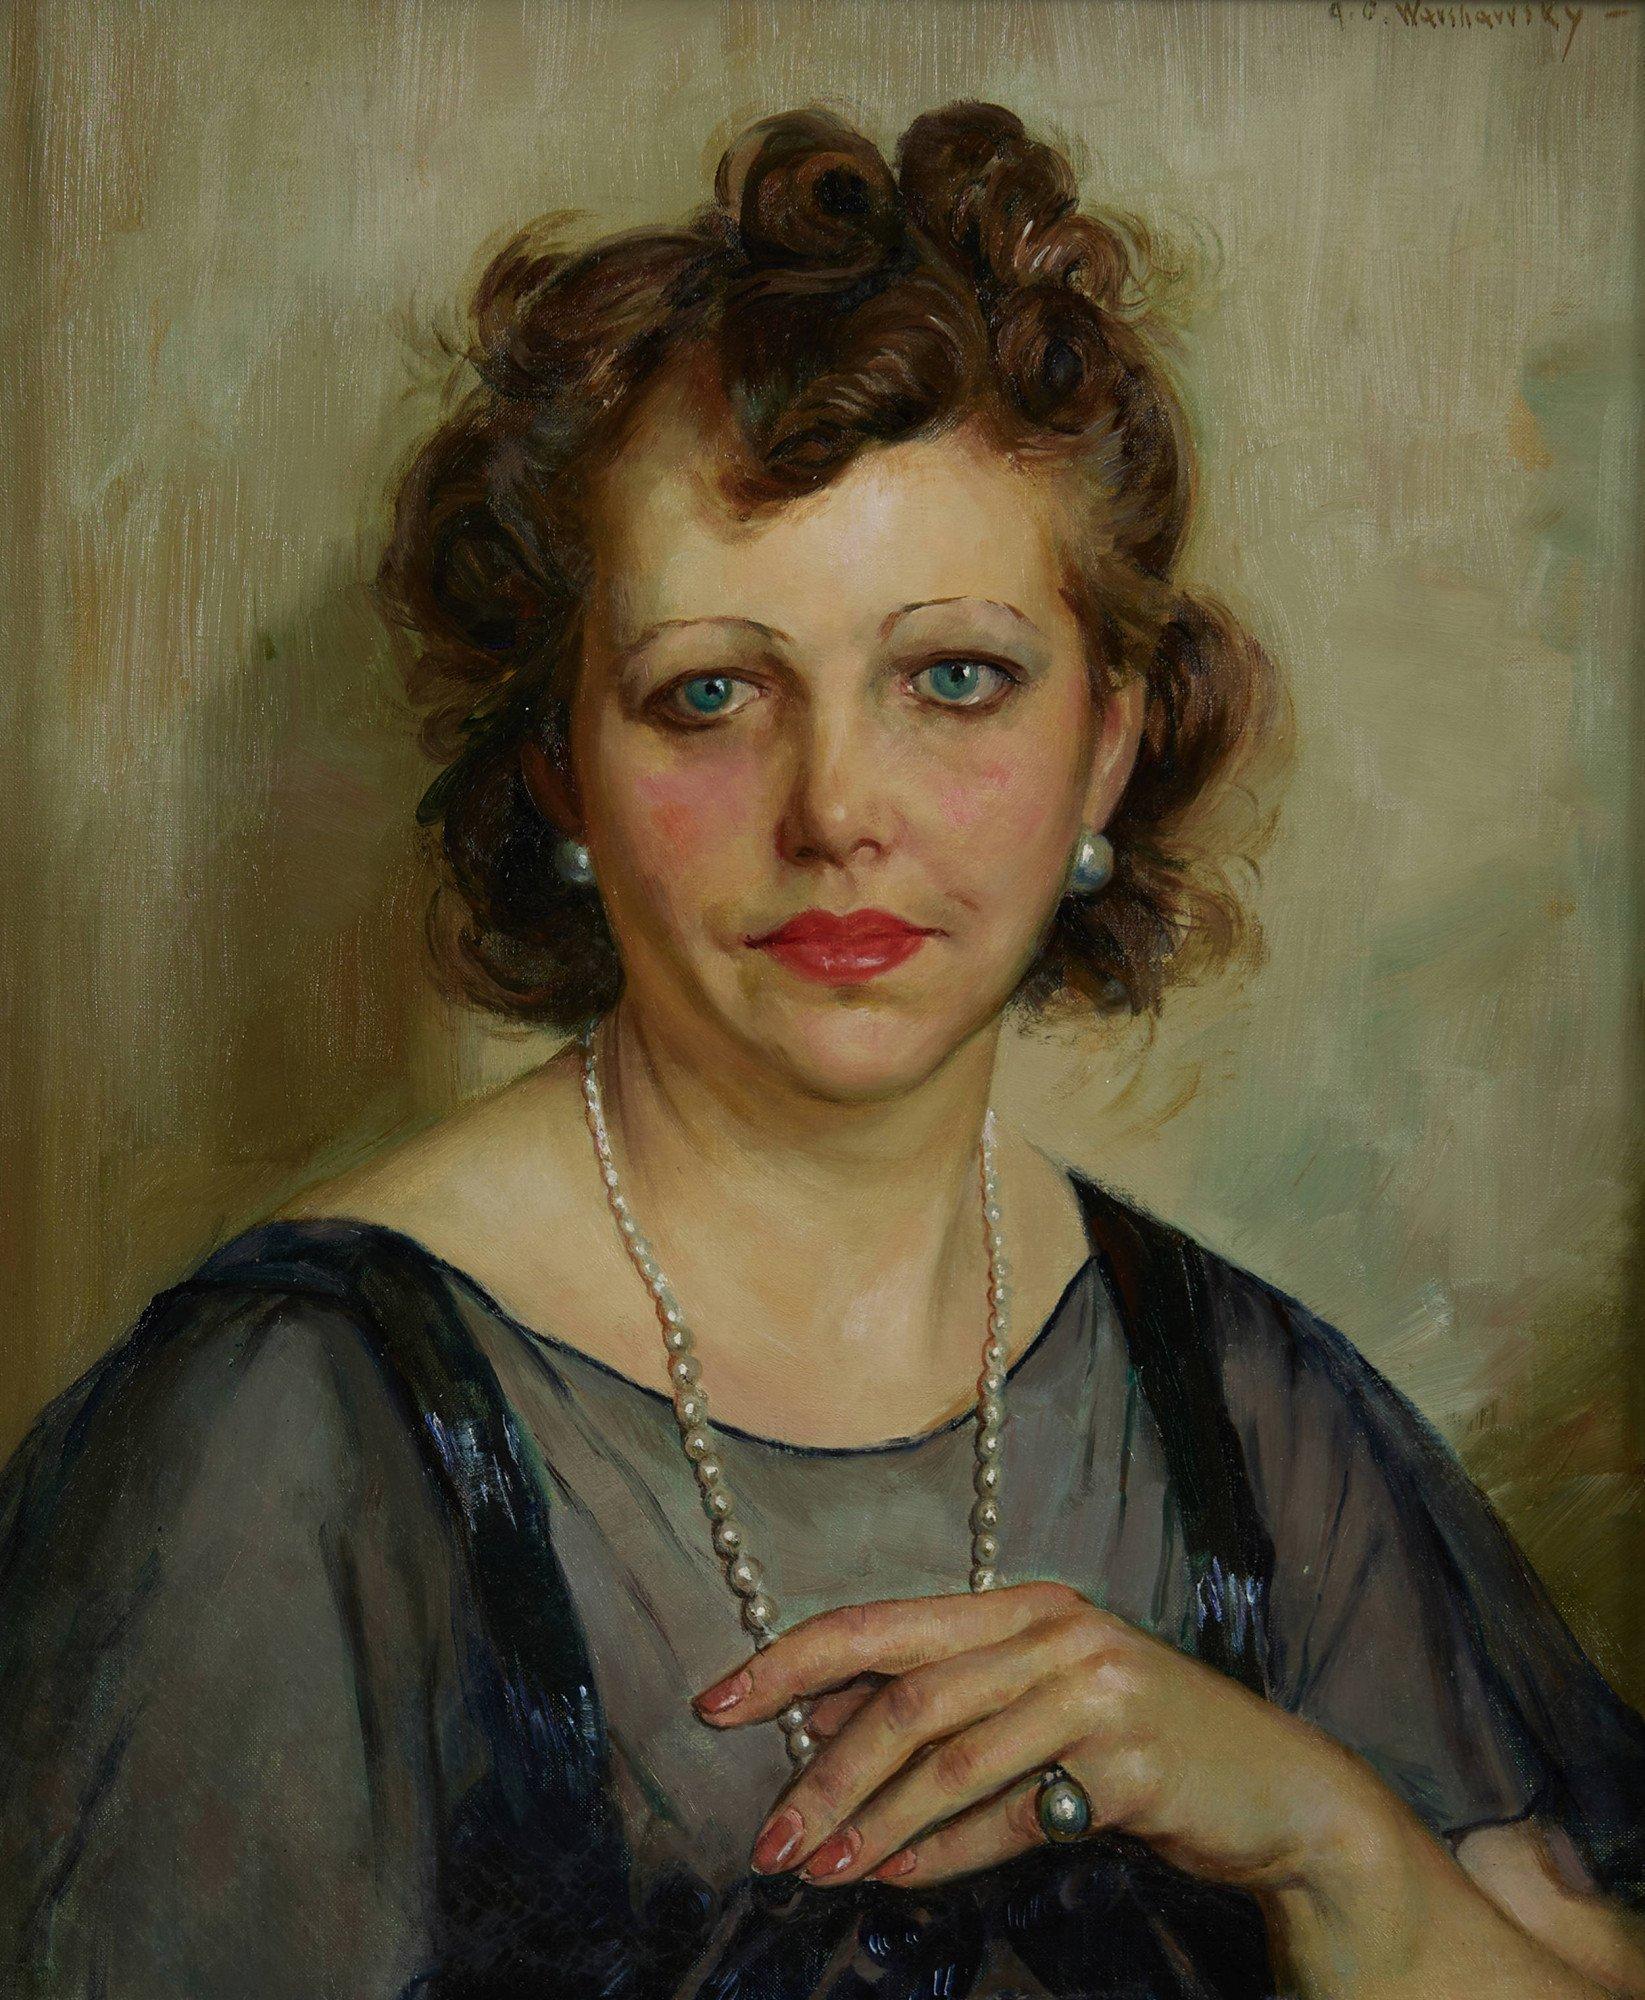 Abel Warshawsky Figurative Painting - The Antique Dealer, 20th Century Oil Portrait of a Woman, Cleveland School